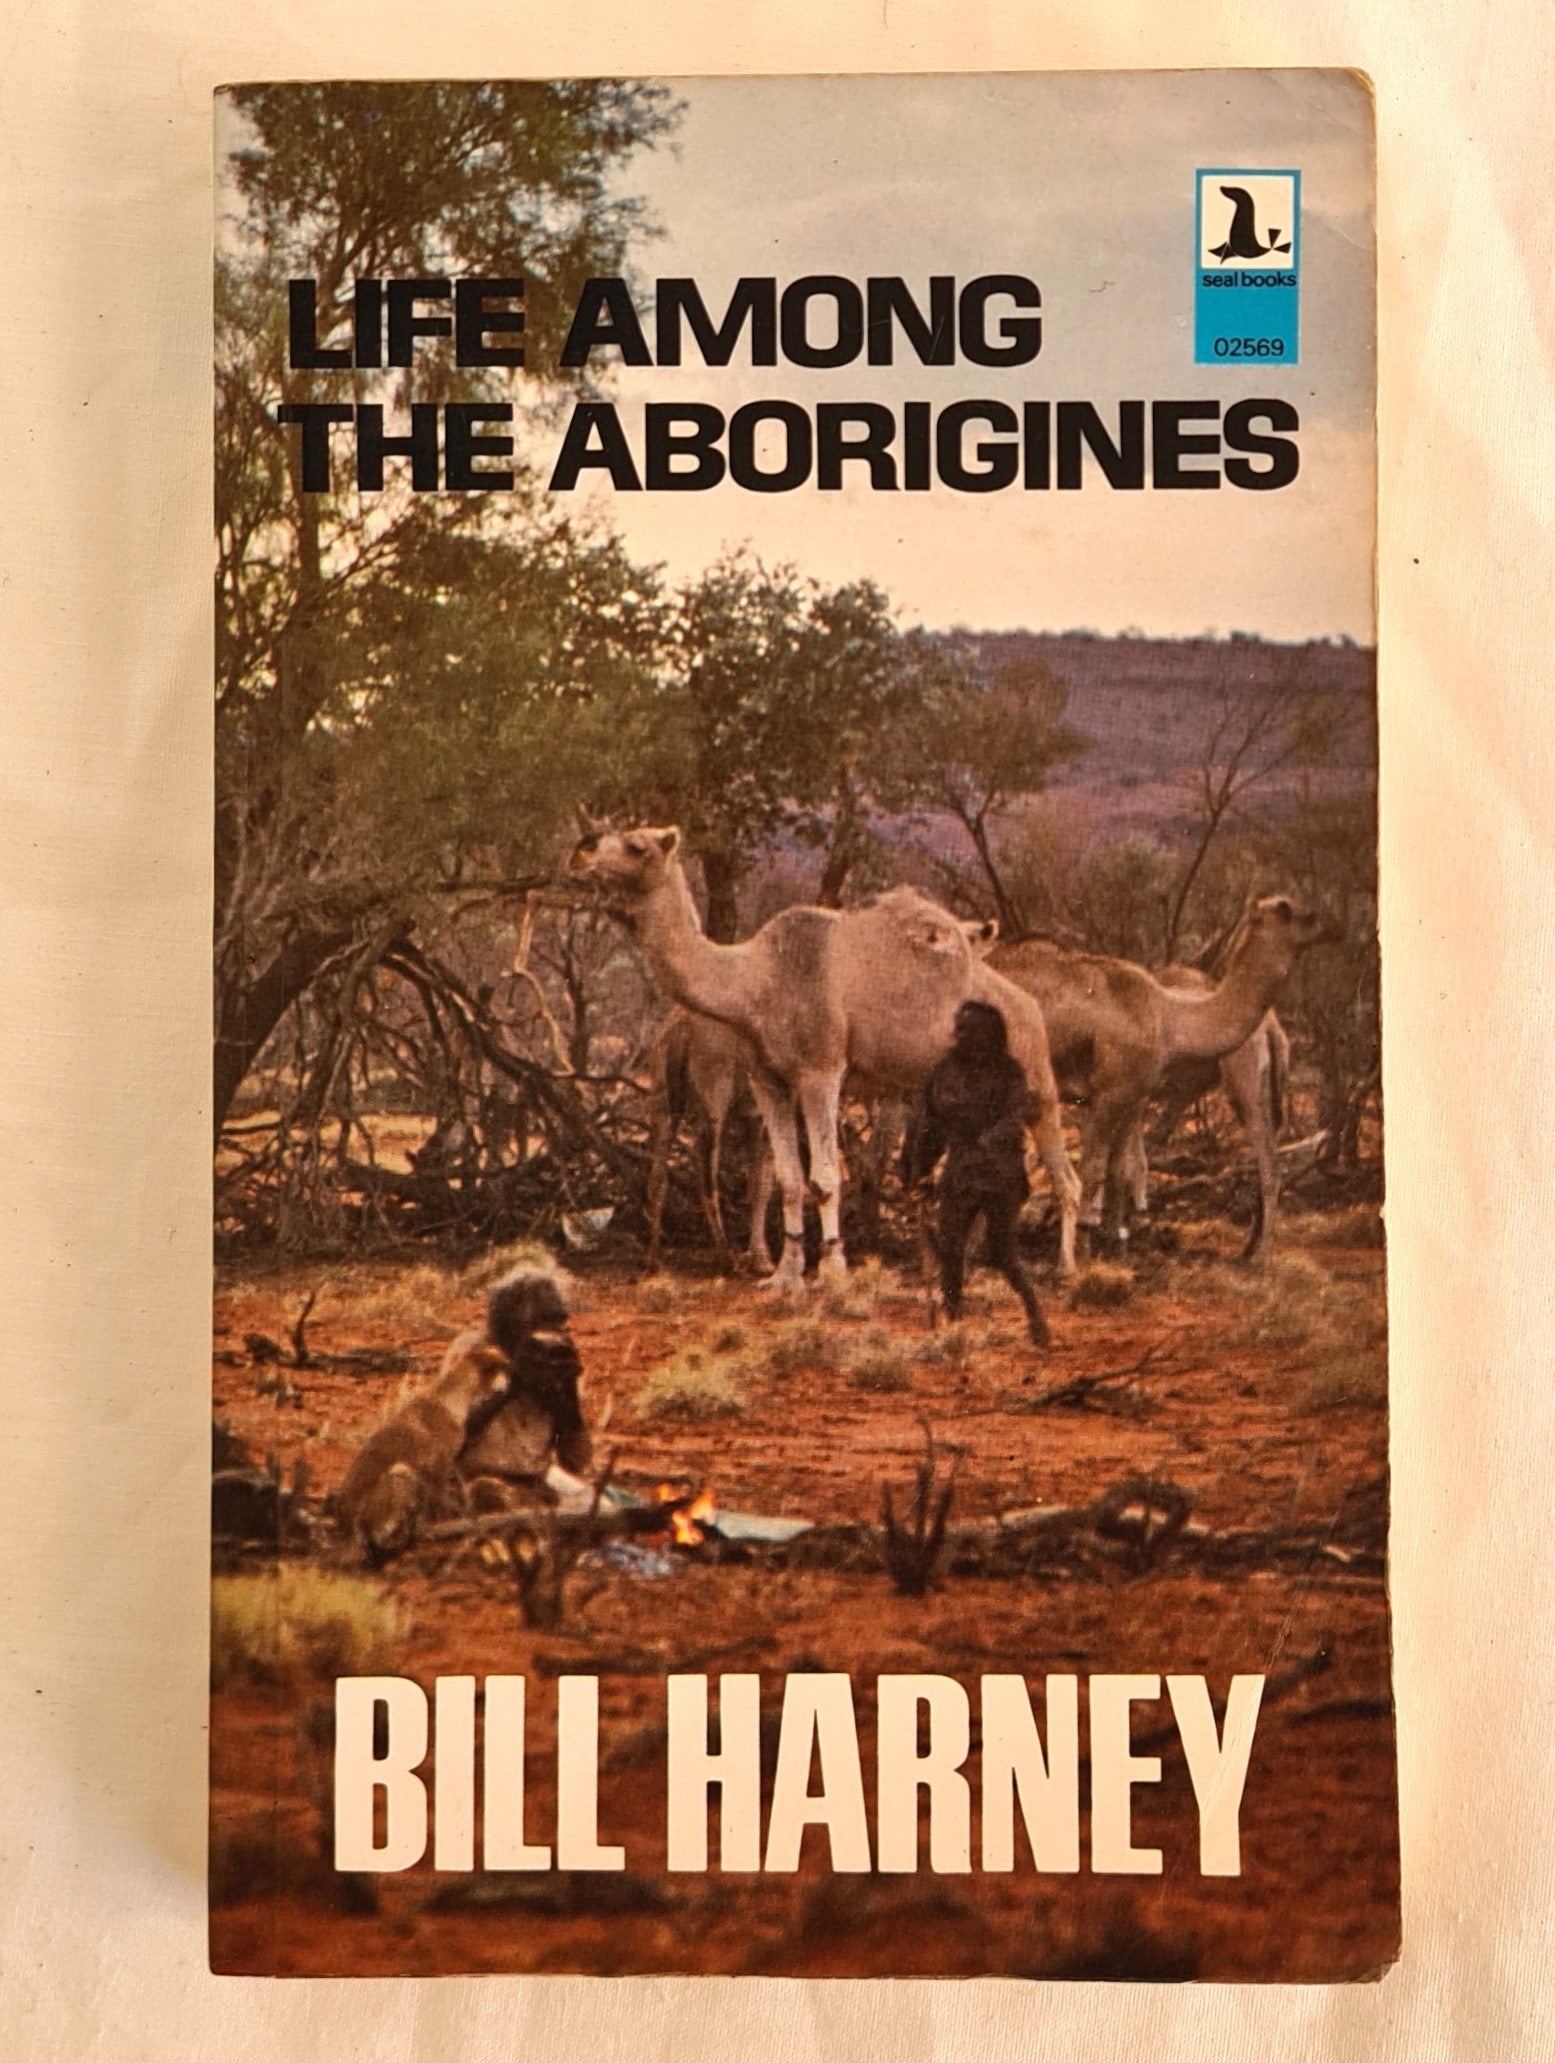 Life Among the Aborigines  by W. E. Harney  Seal Books